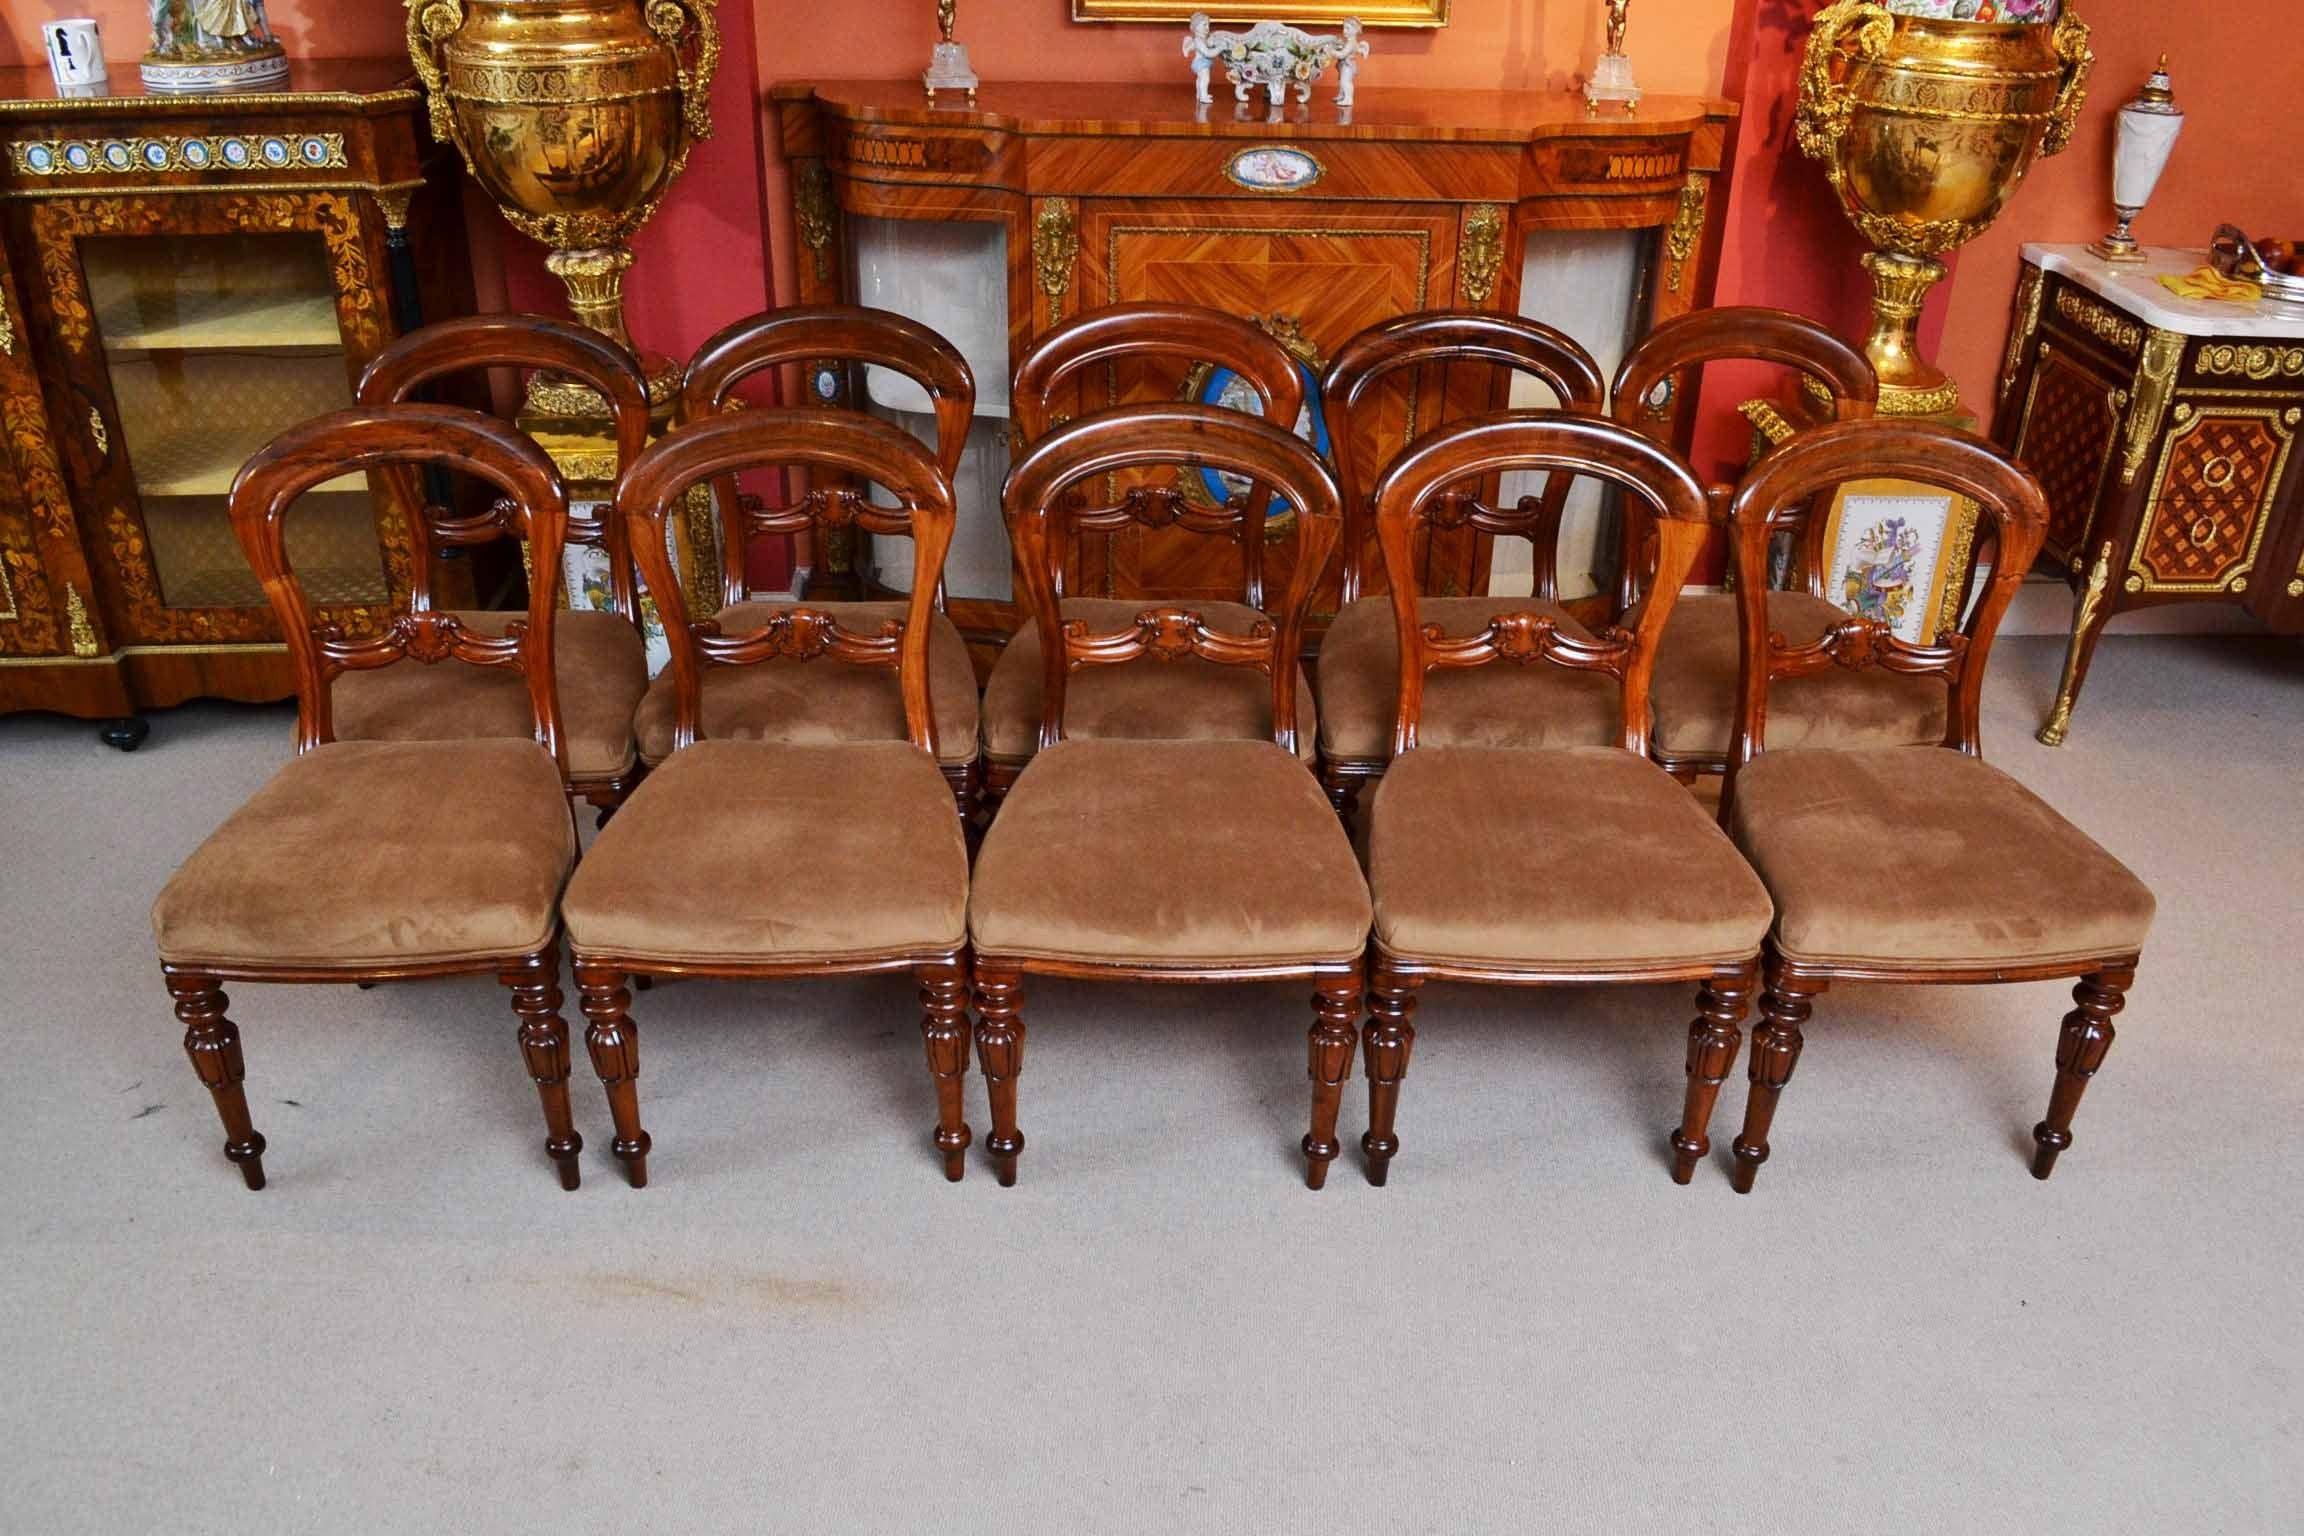 Antique Set of 10 Victorian Balloon Back Dining Chairs